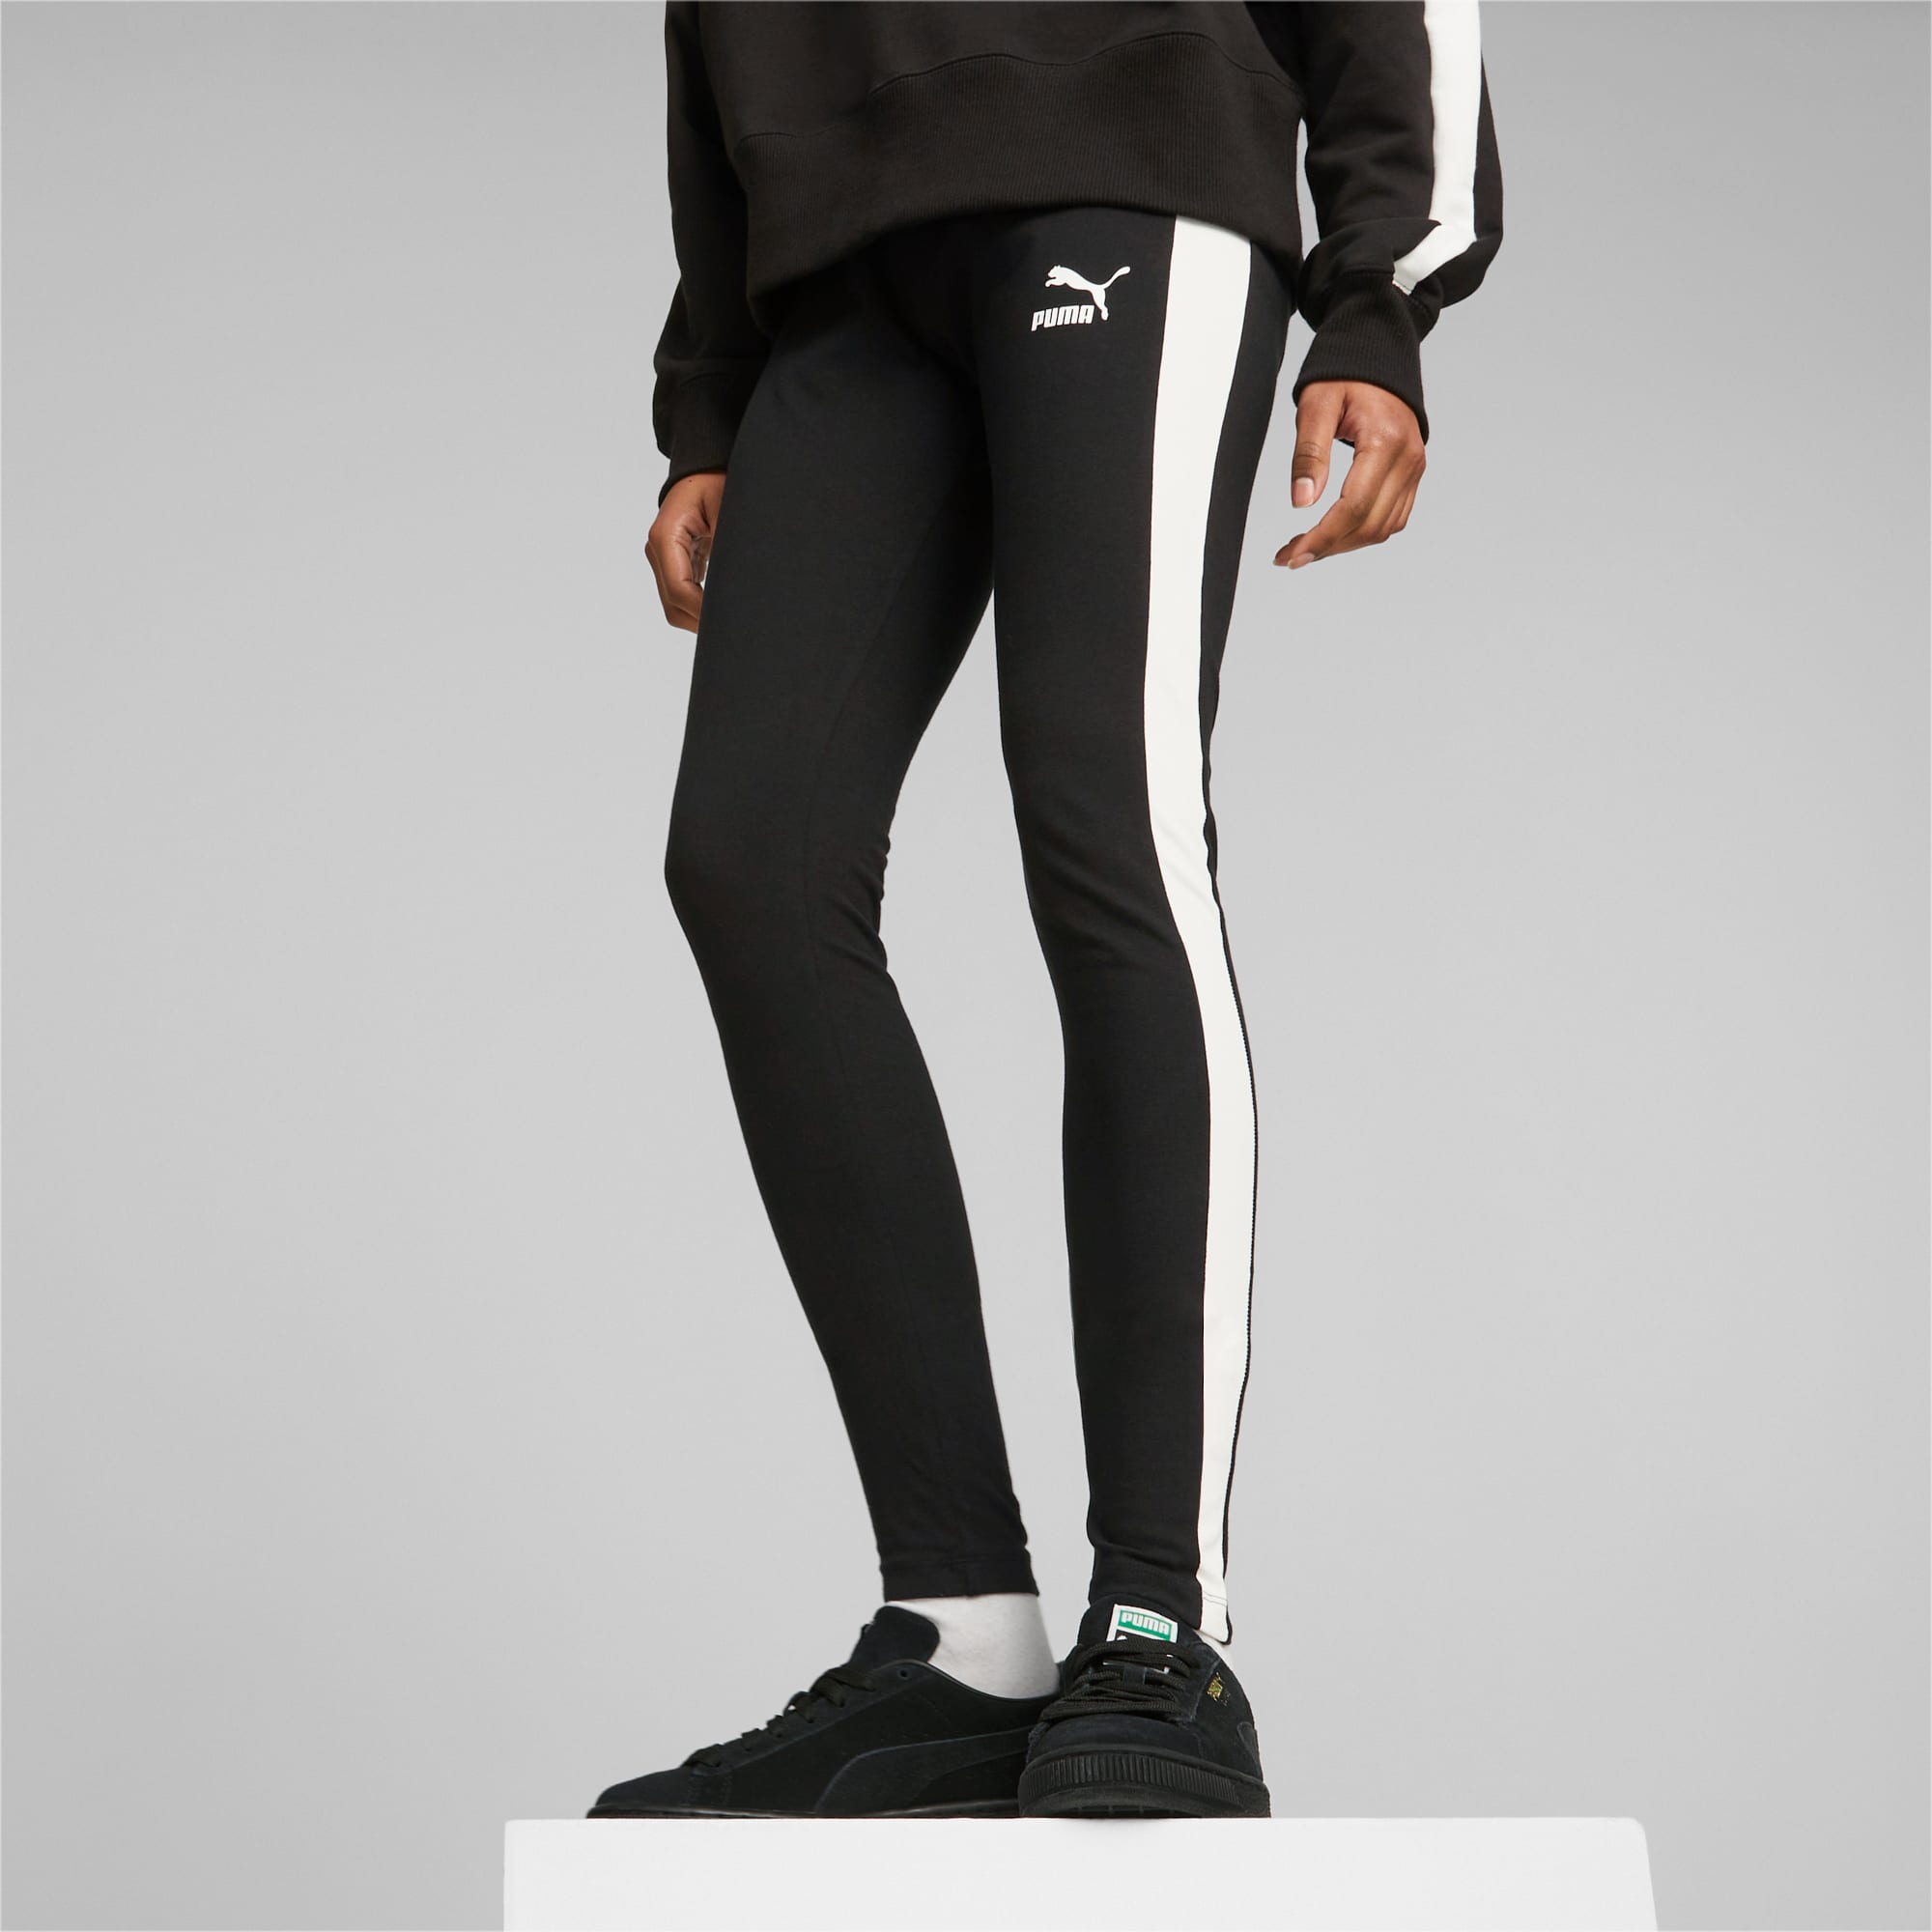 PUMA Women's Iconic T7 Leggings (Available in Plus Sizes